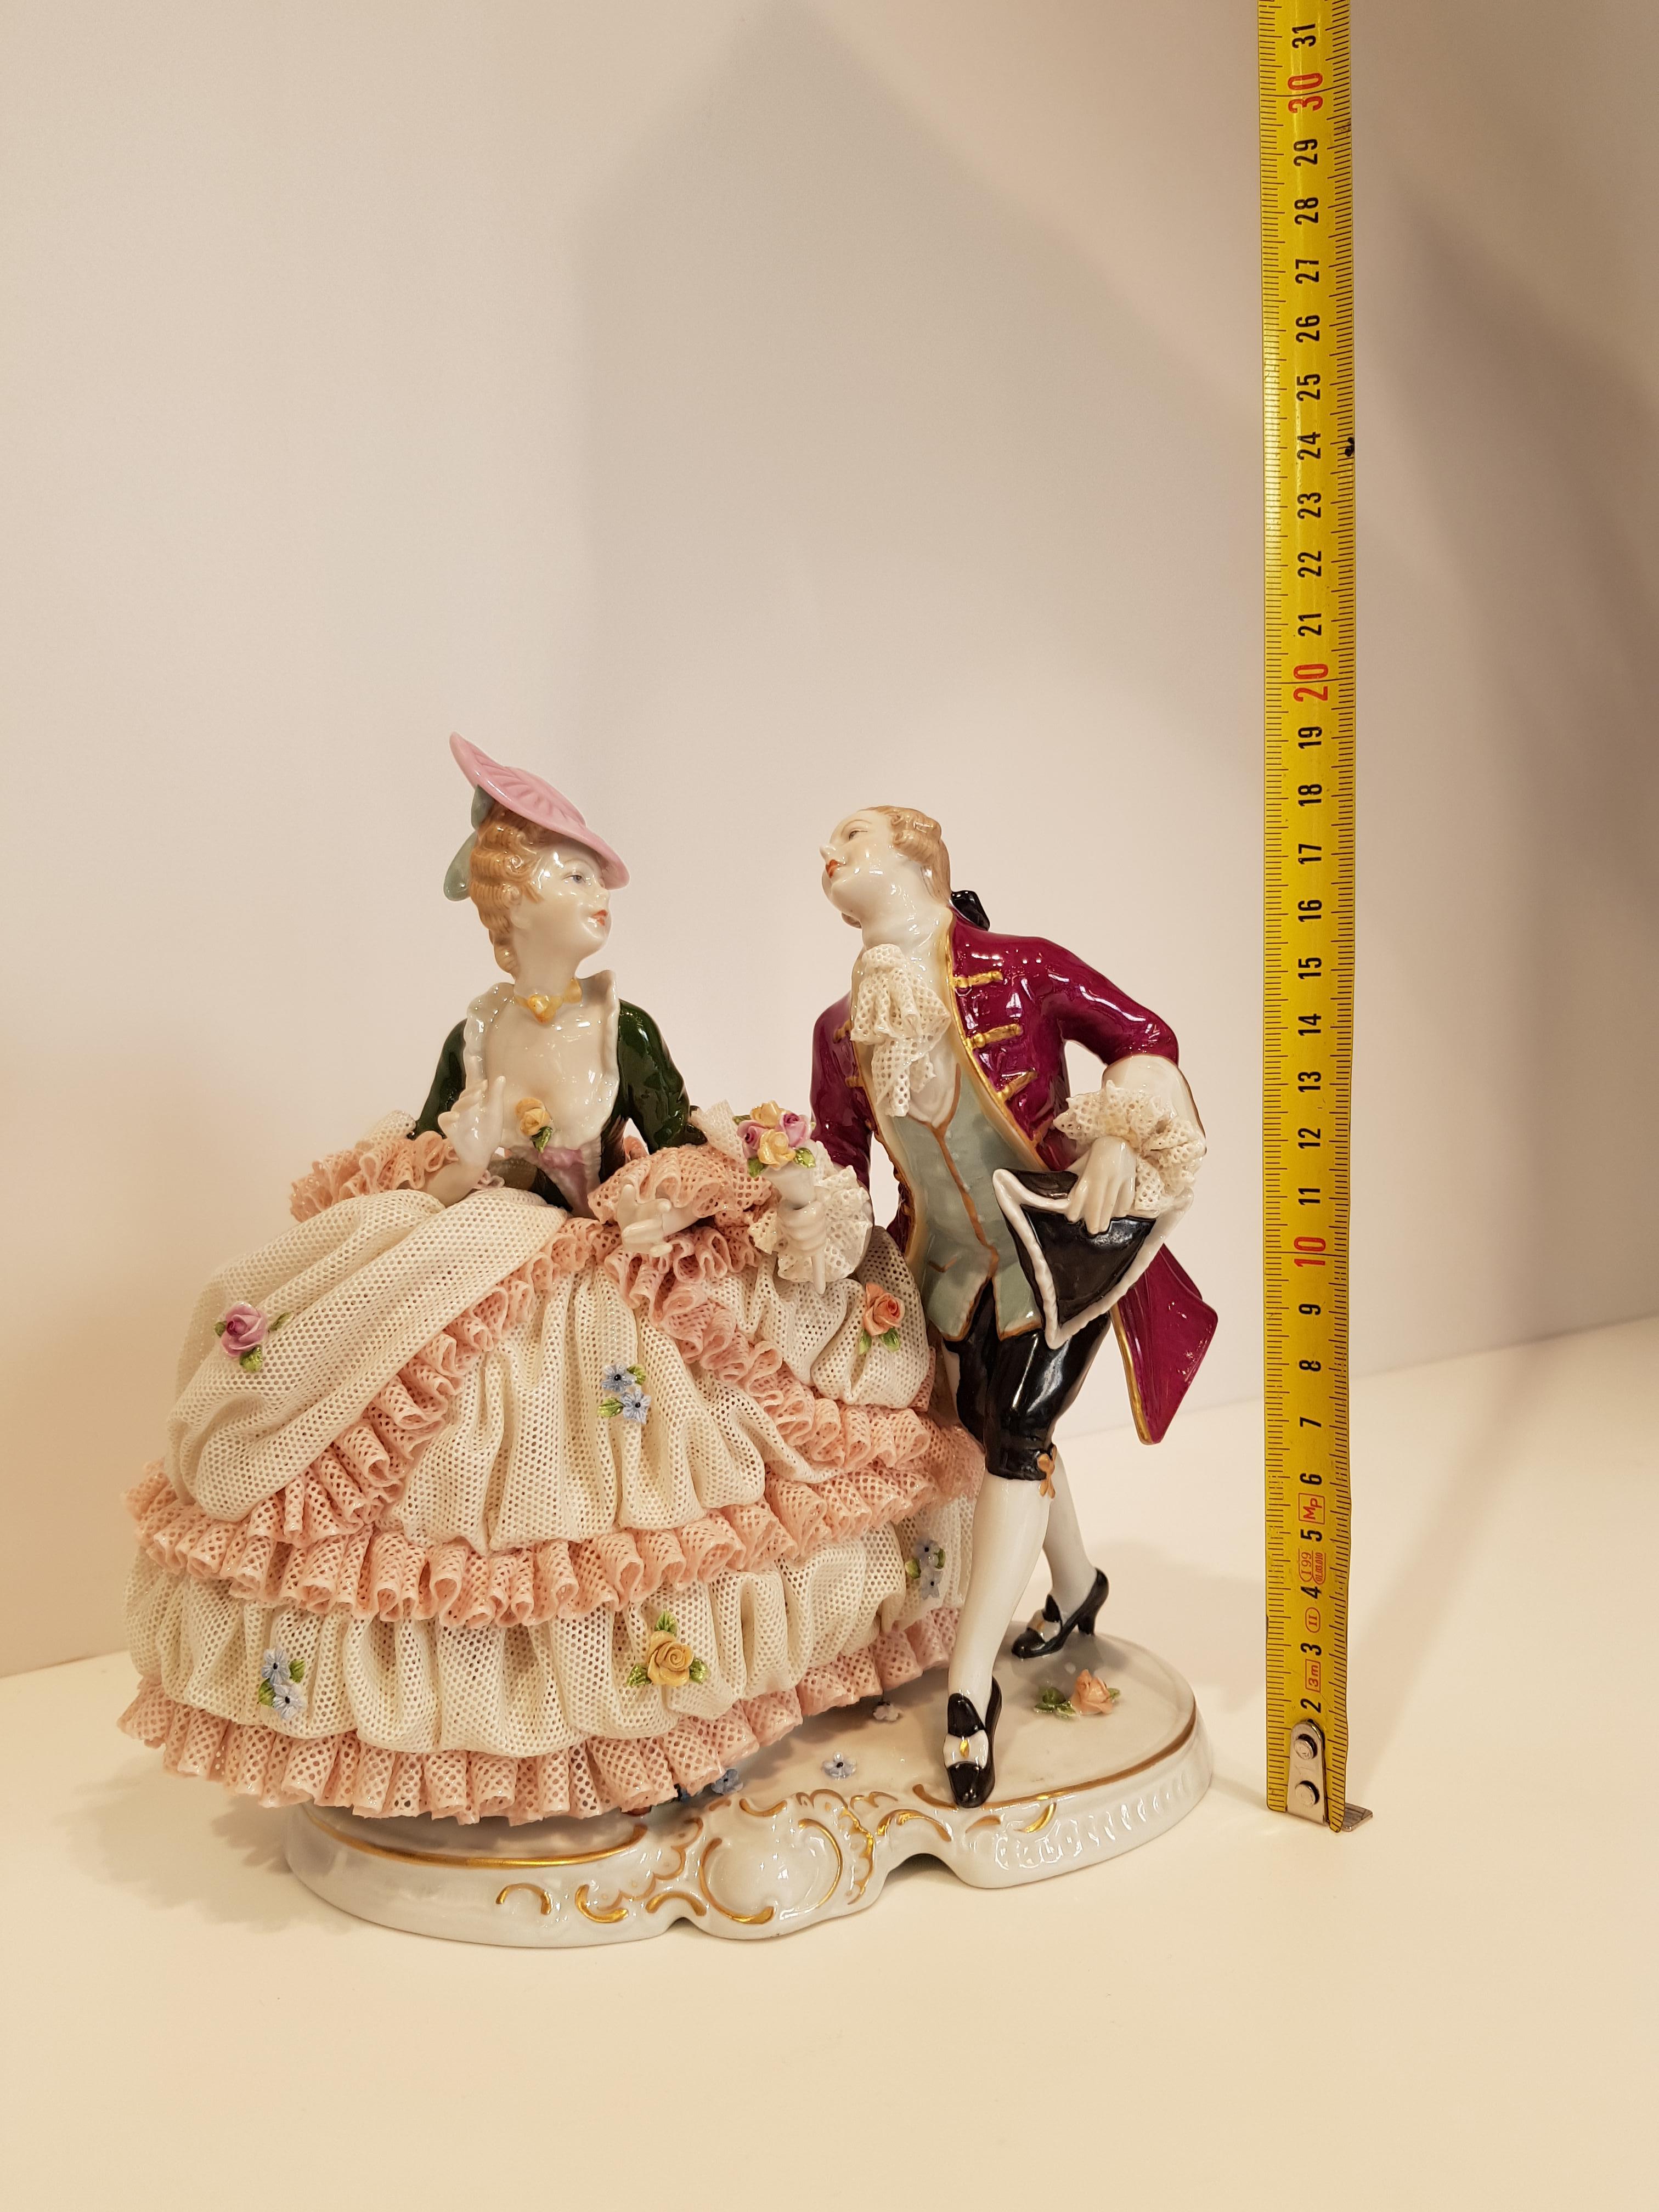 Original Unterweissbach porcelain Turingia (Germania), whose production ceased more than 50 years ago.
This Louis XVI style item is entirely finely crafted and hand decorated with the ancient techniques of the Unterweissbach artisans of the